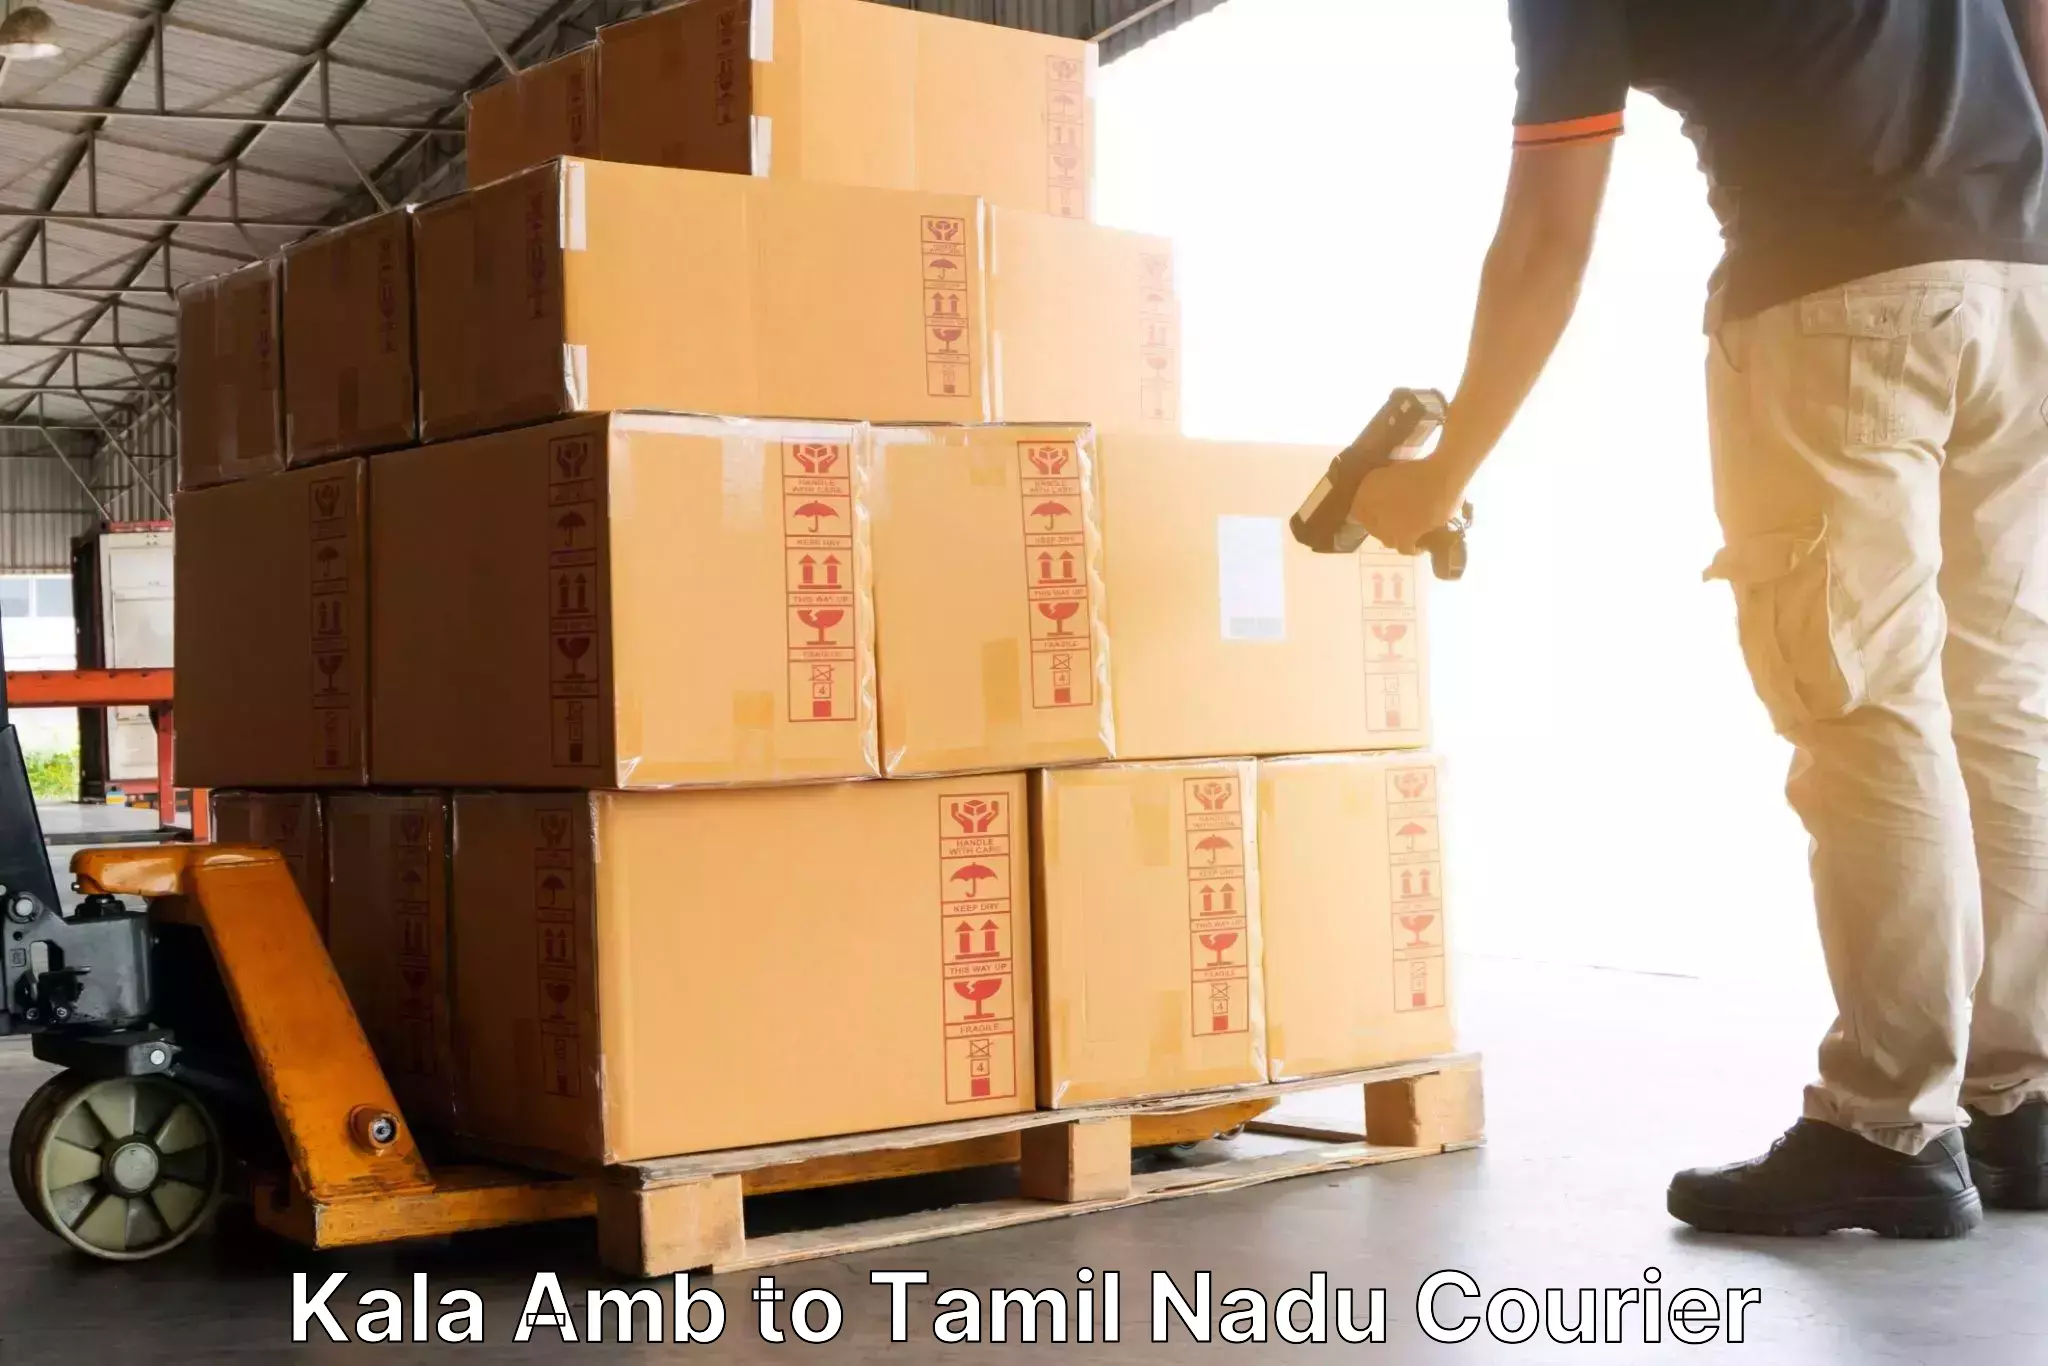 Courier tracking online Kala Amb to Tamil Nadu